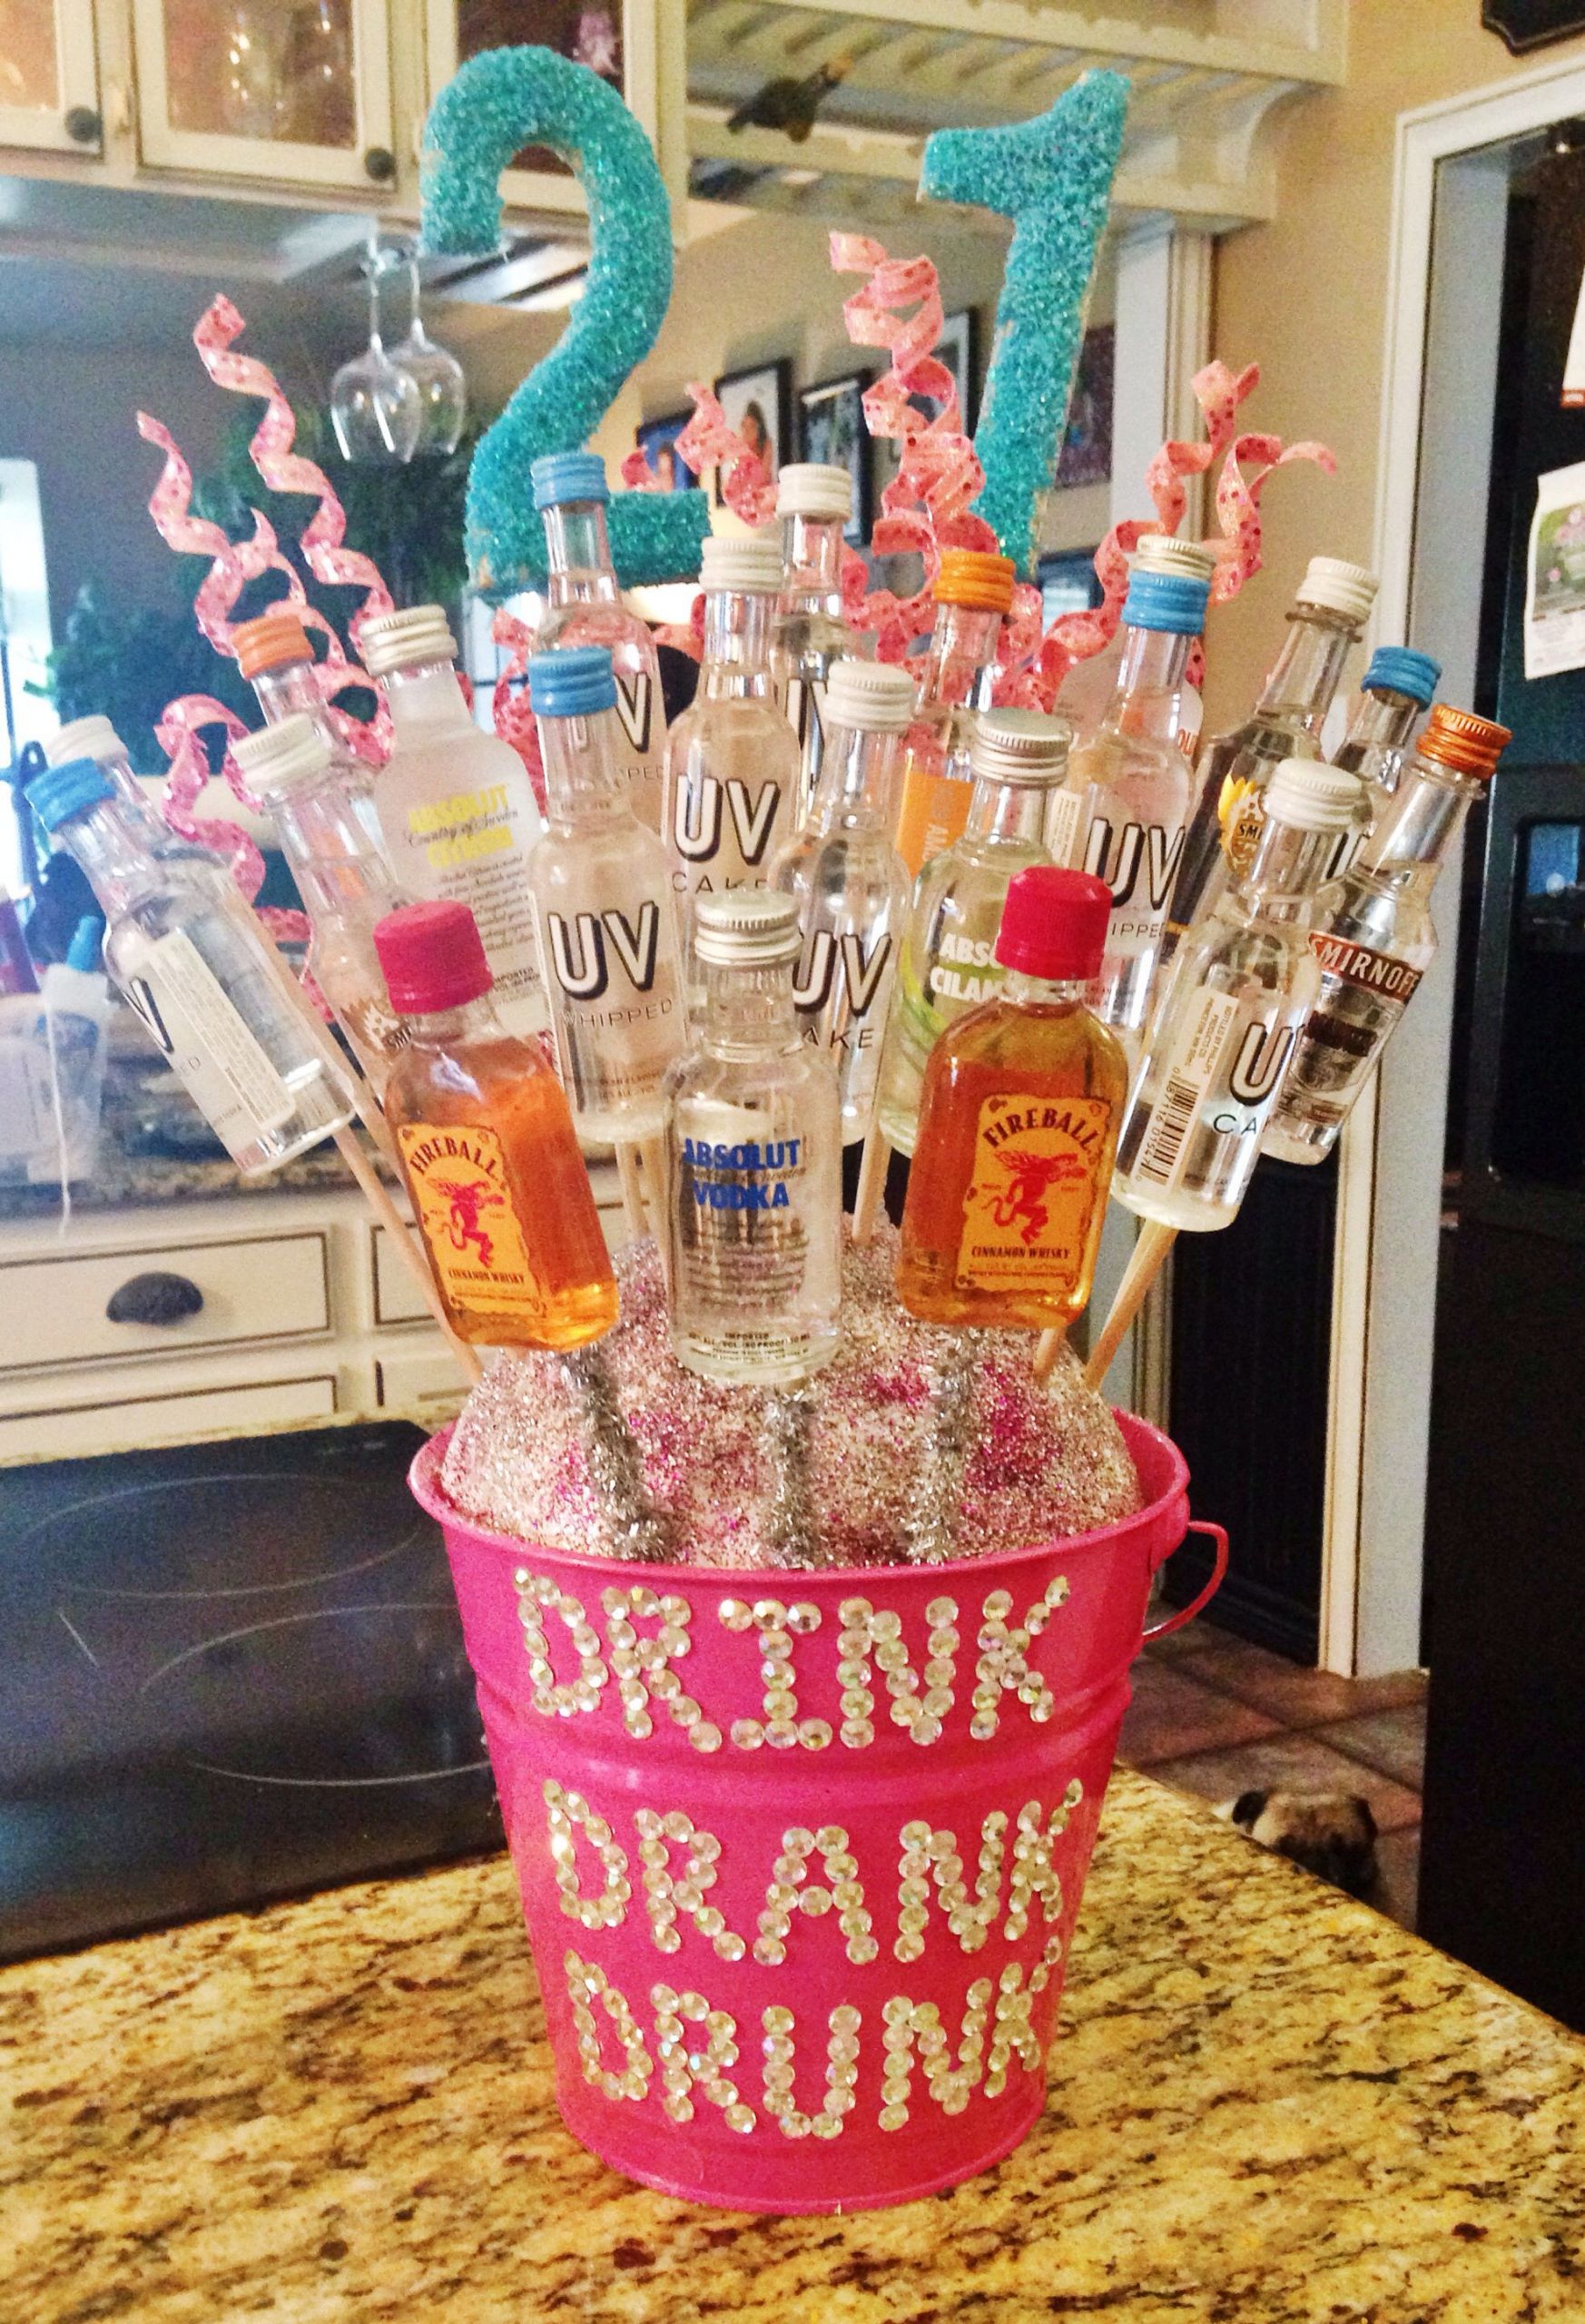 21-ideas-for-17th-birthday-party-ideas-with-alcohol-home-family-style-and-art-ideas